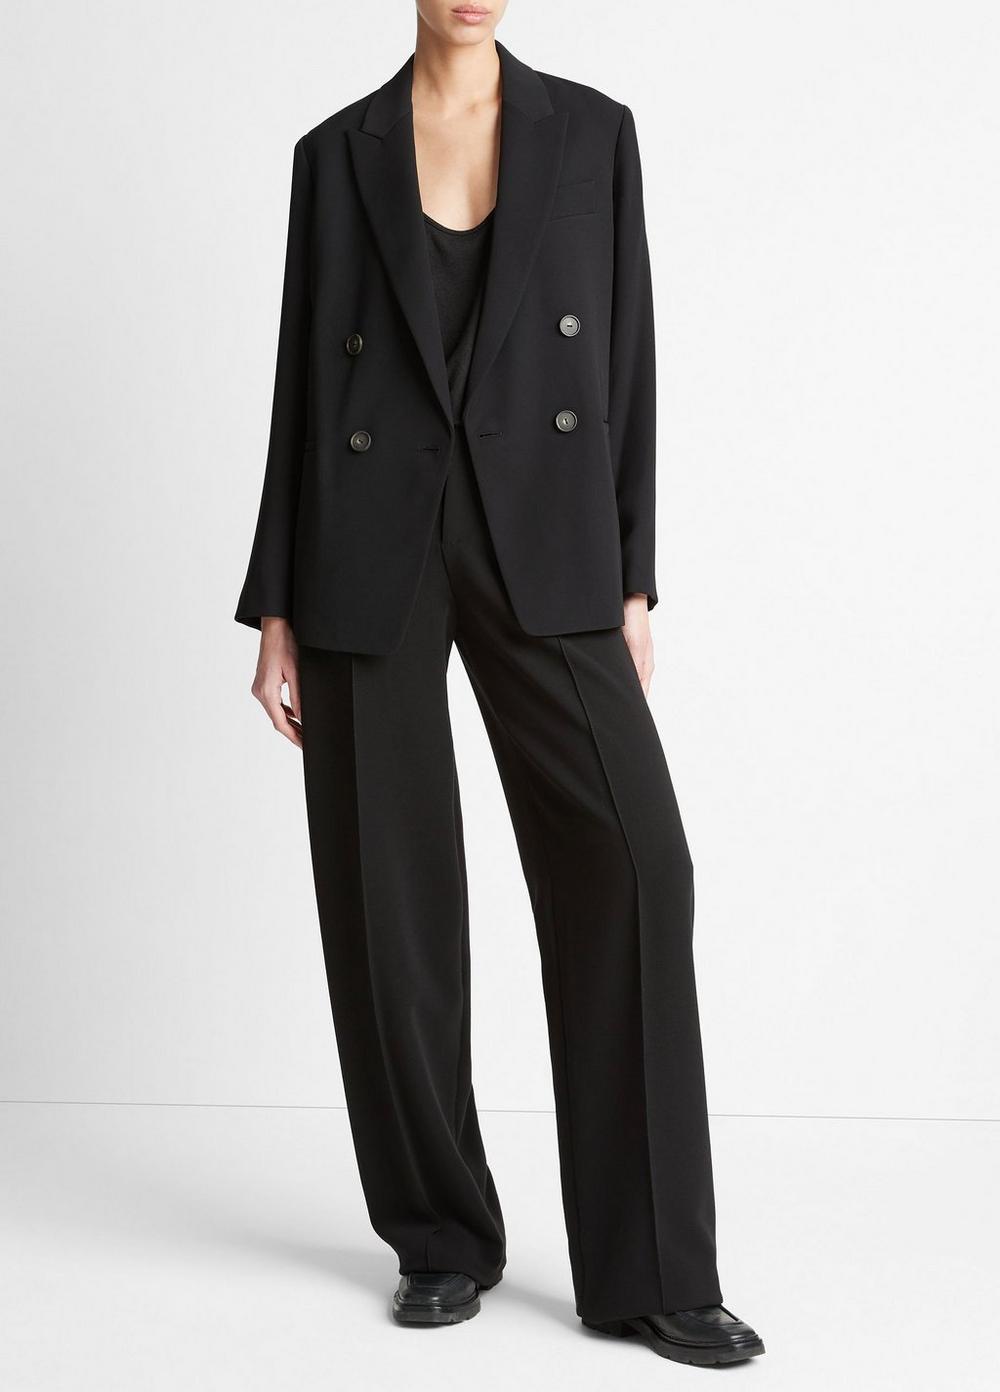 Vince Crepe Double-Breasted Blazer